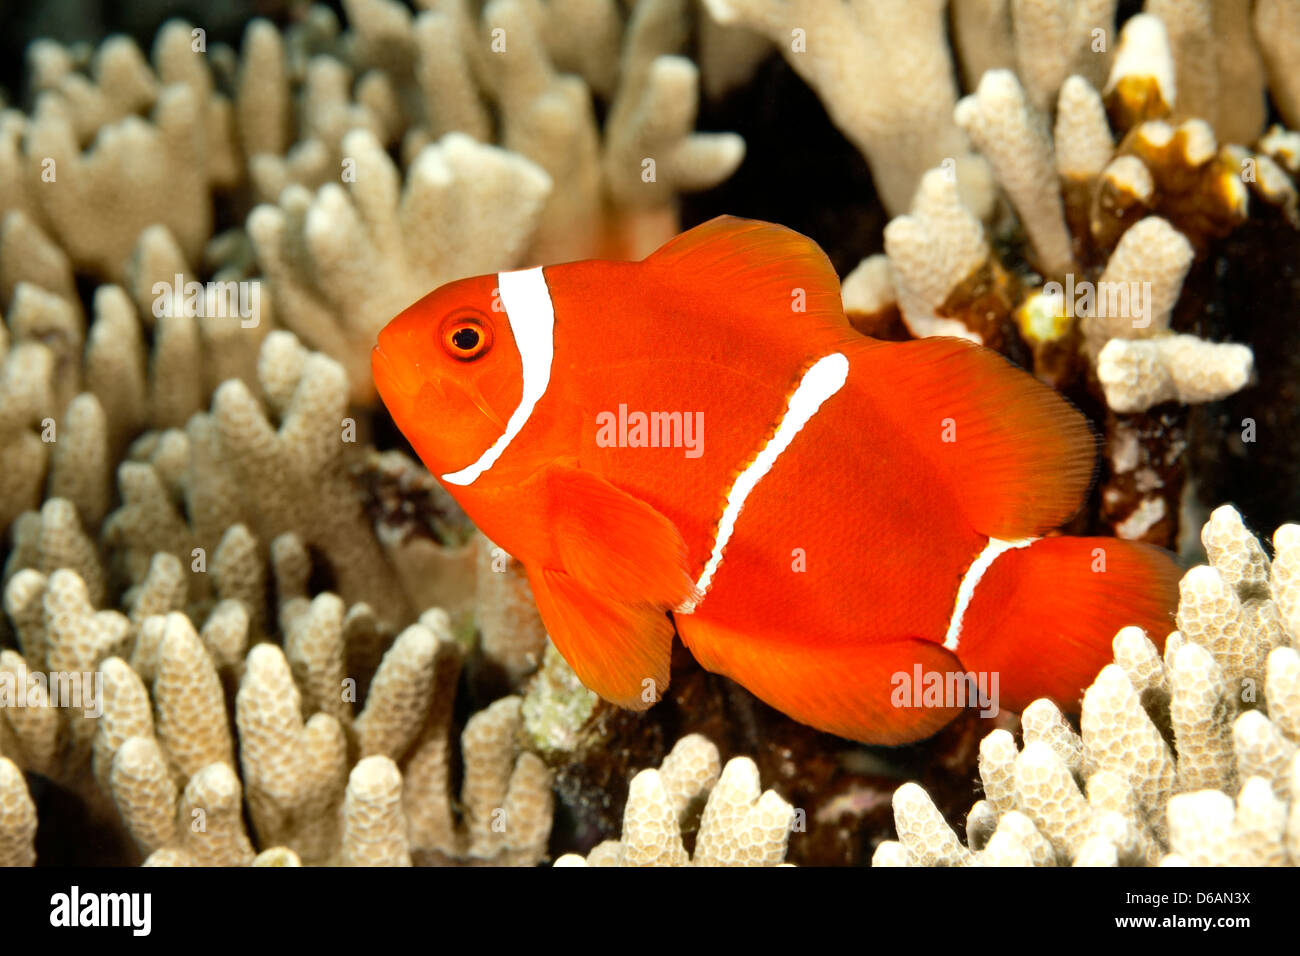 Spinecheek Anemonefish, also known as a Maroon Clownfish, Premnas biaculeatus. Stock Photo